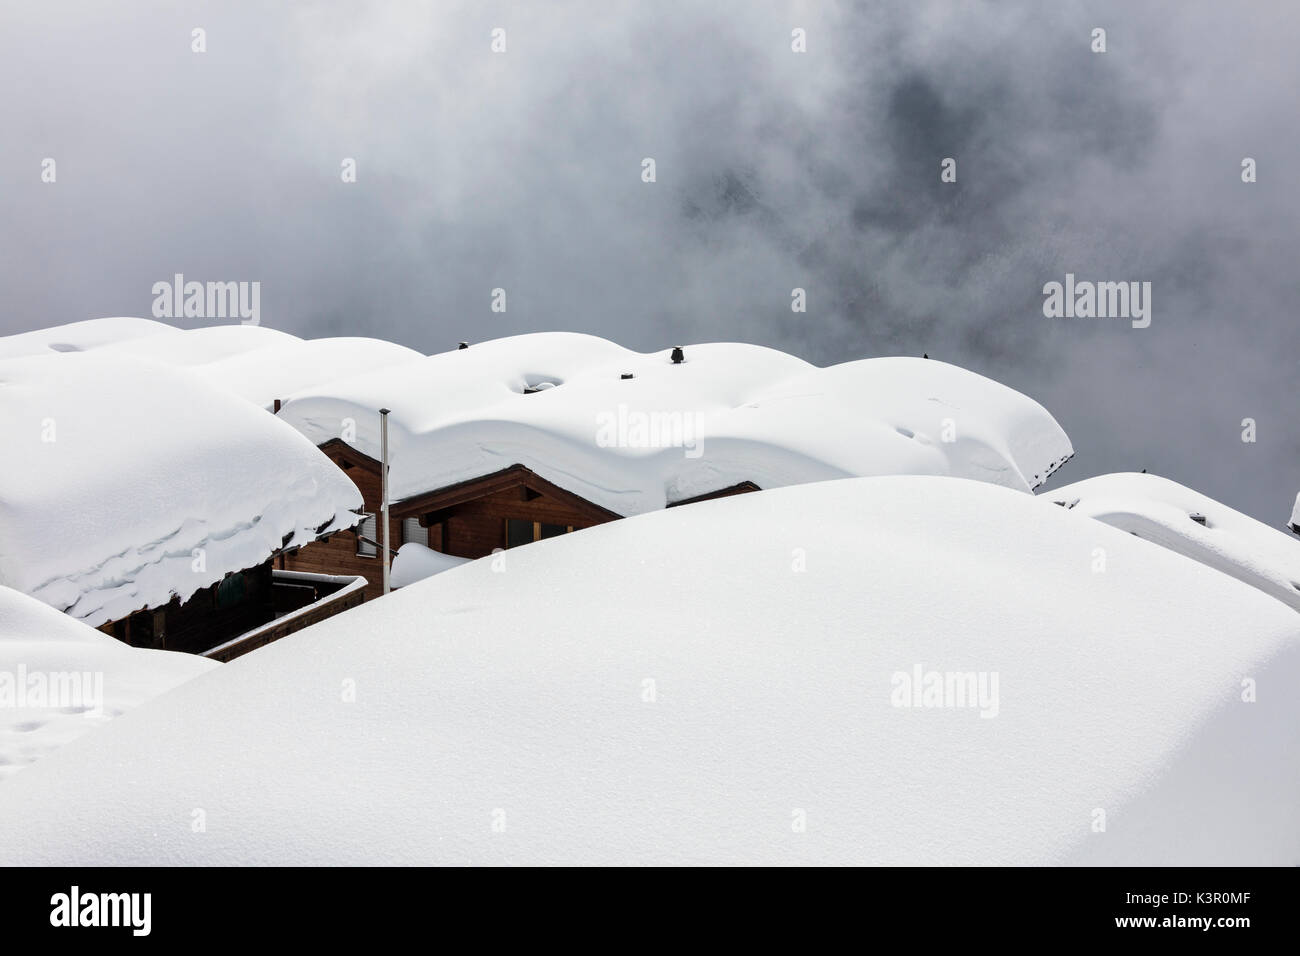 Snow covered mountain huts surrounded by low clouds Bettmeralp district of Raron canton of Valais Switzerland Europe Stock Photo